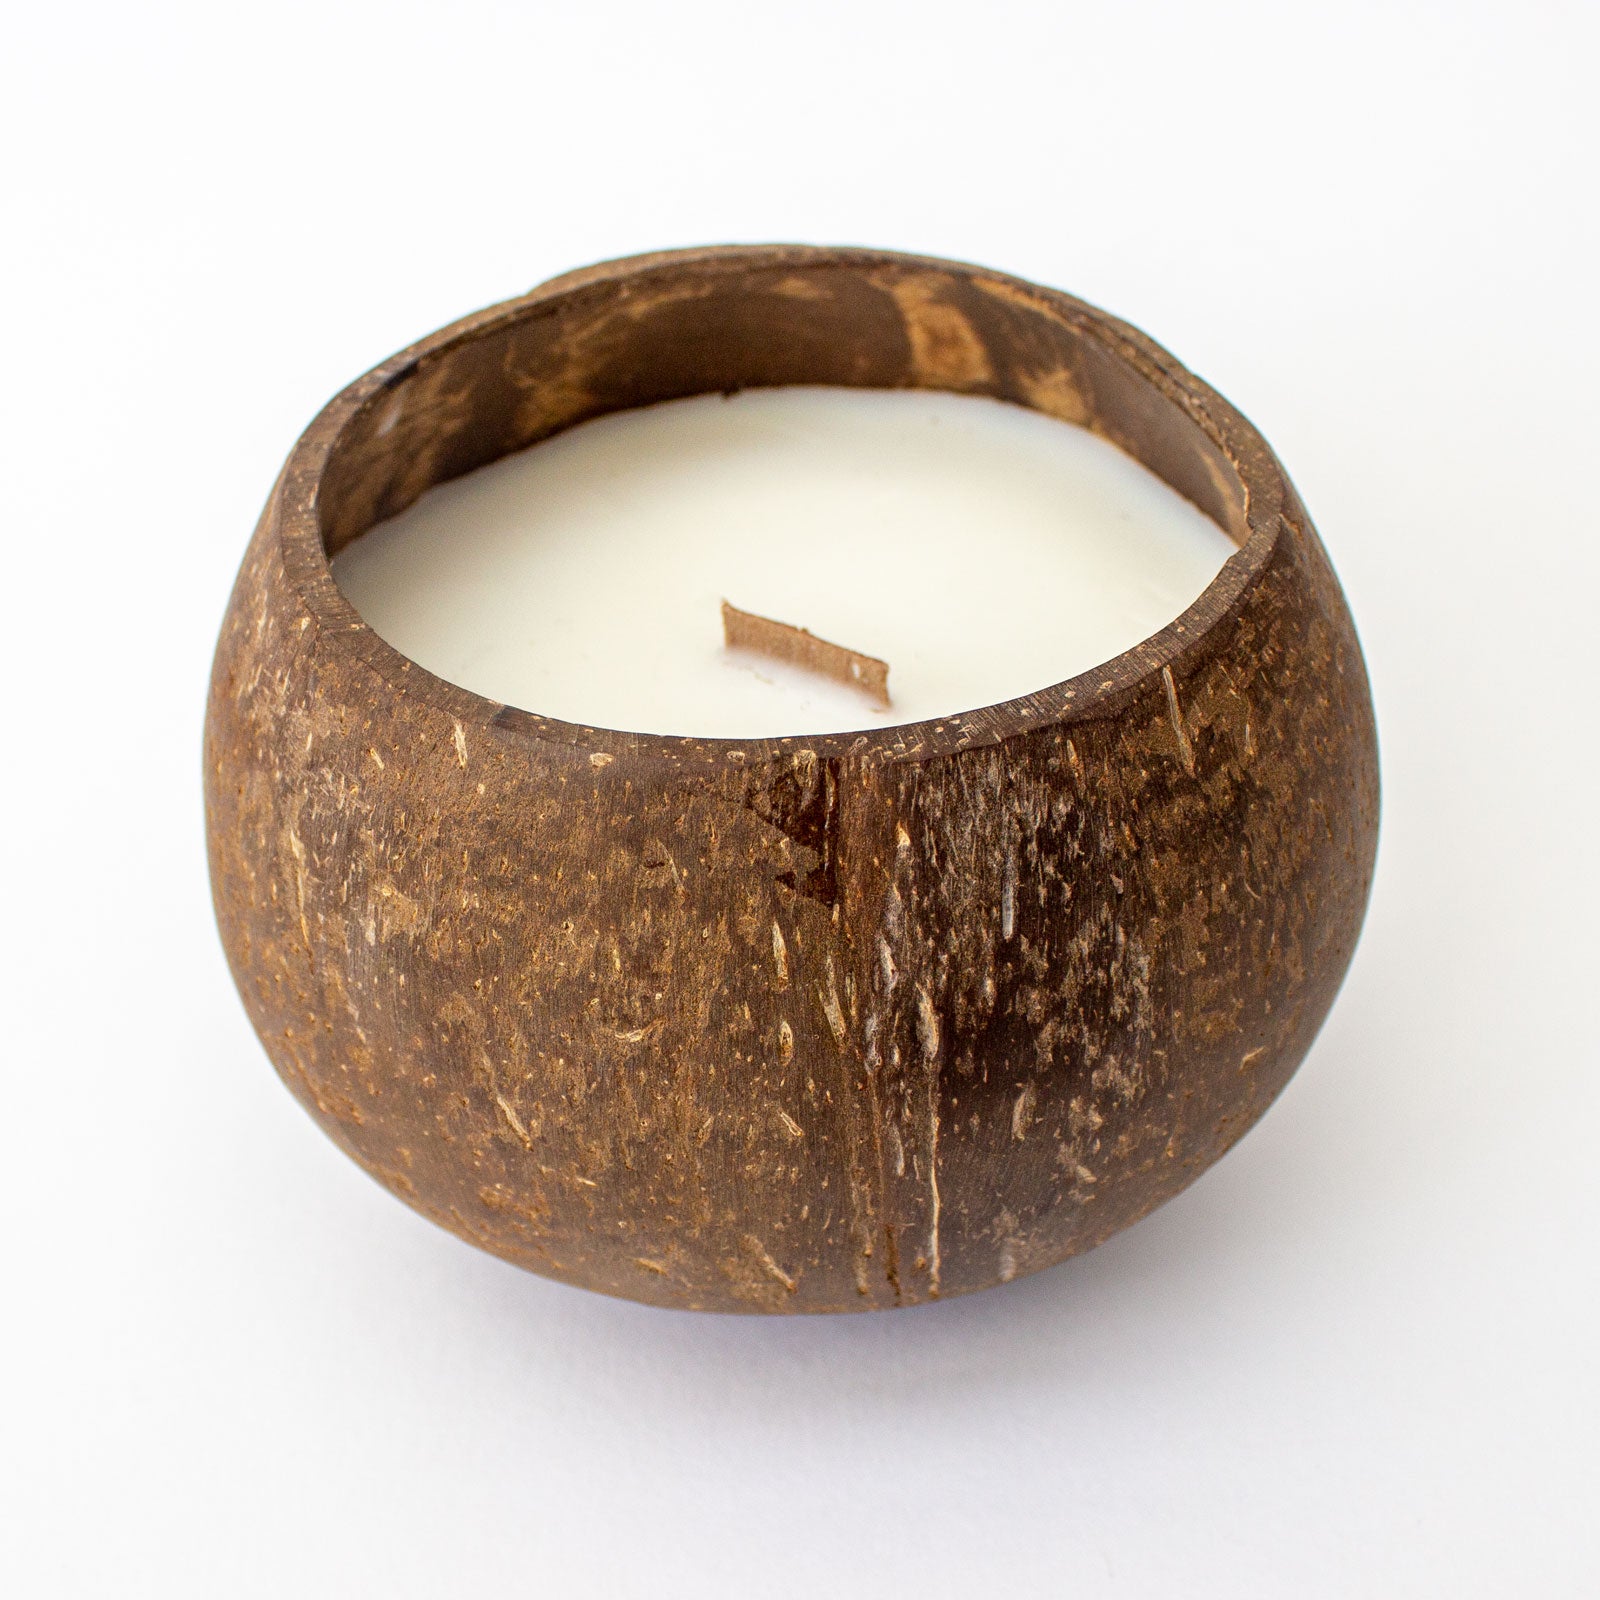 THANK YOU - Toasted Coconut Bowl Candle – Soy Wax - Gift Present